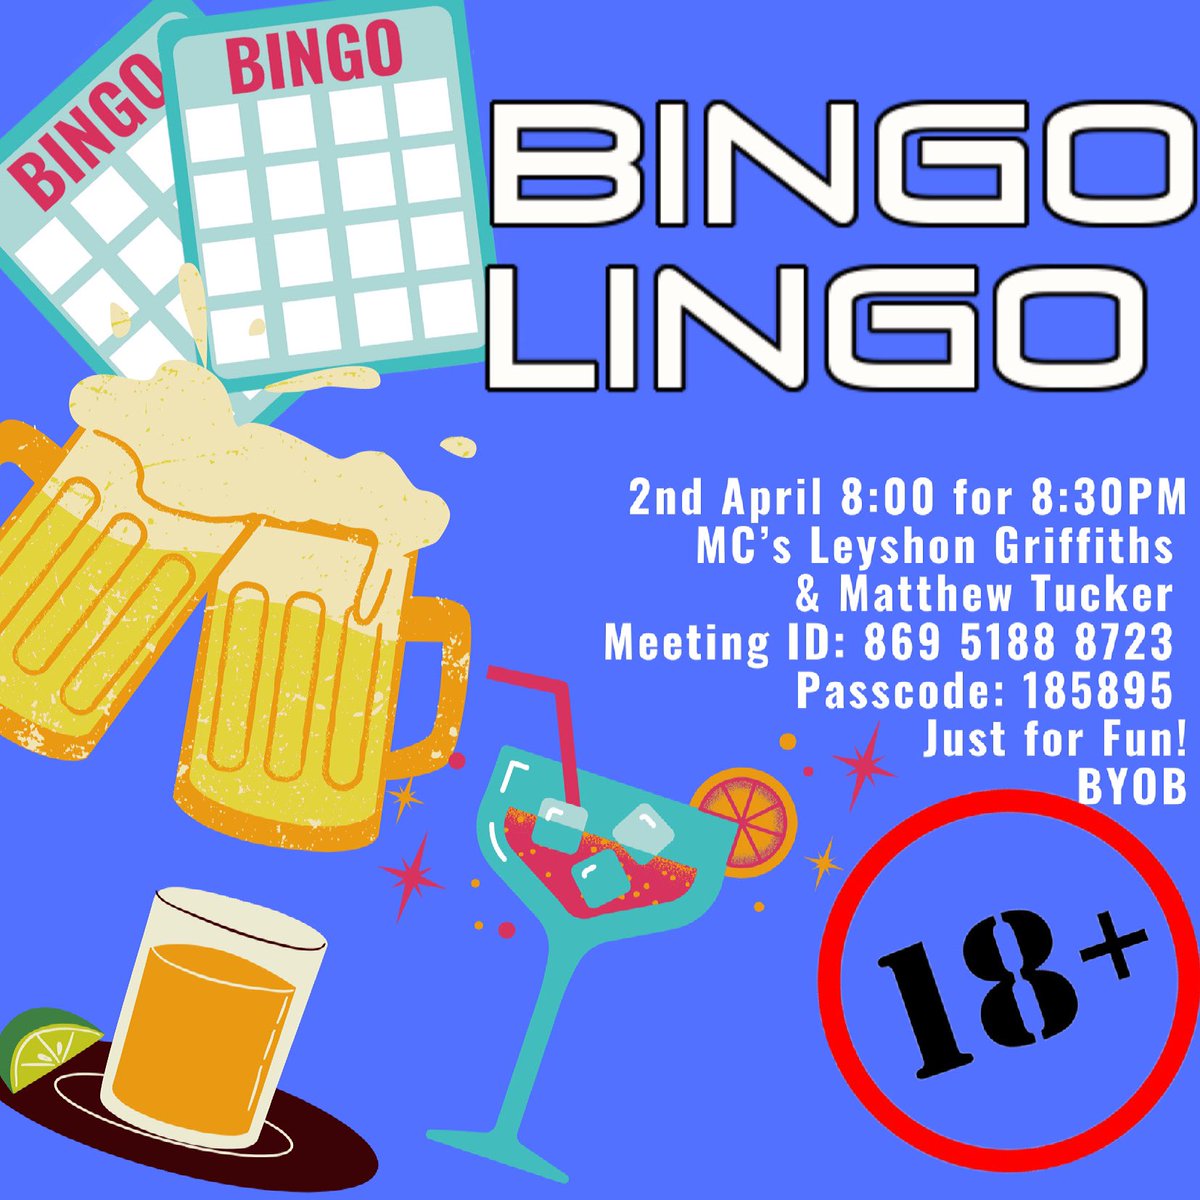 It’s Bingo but not as you know it! Fed up of life in lockdown, looking for some fun & excitement then look no further. Join us next Friday as we launch our 1st over 18 BINGO LINGO night with hosts Mathew Tucker & Leyshon Griffiths. Get the beers to hand & let’s do this!